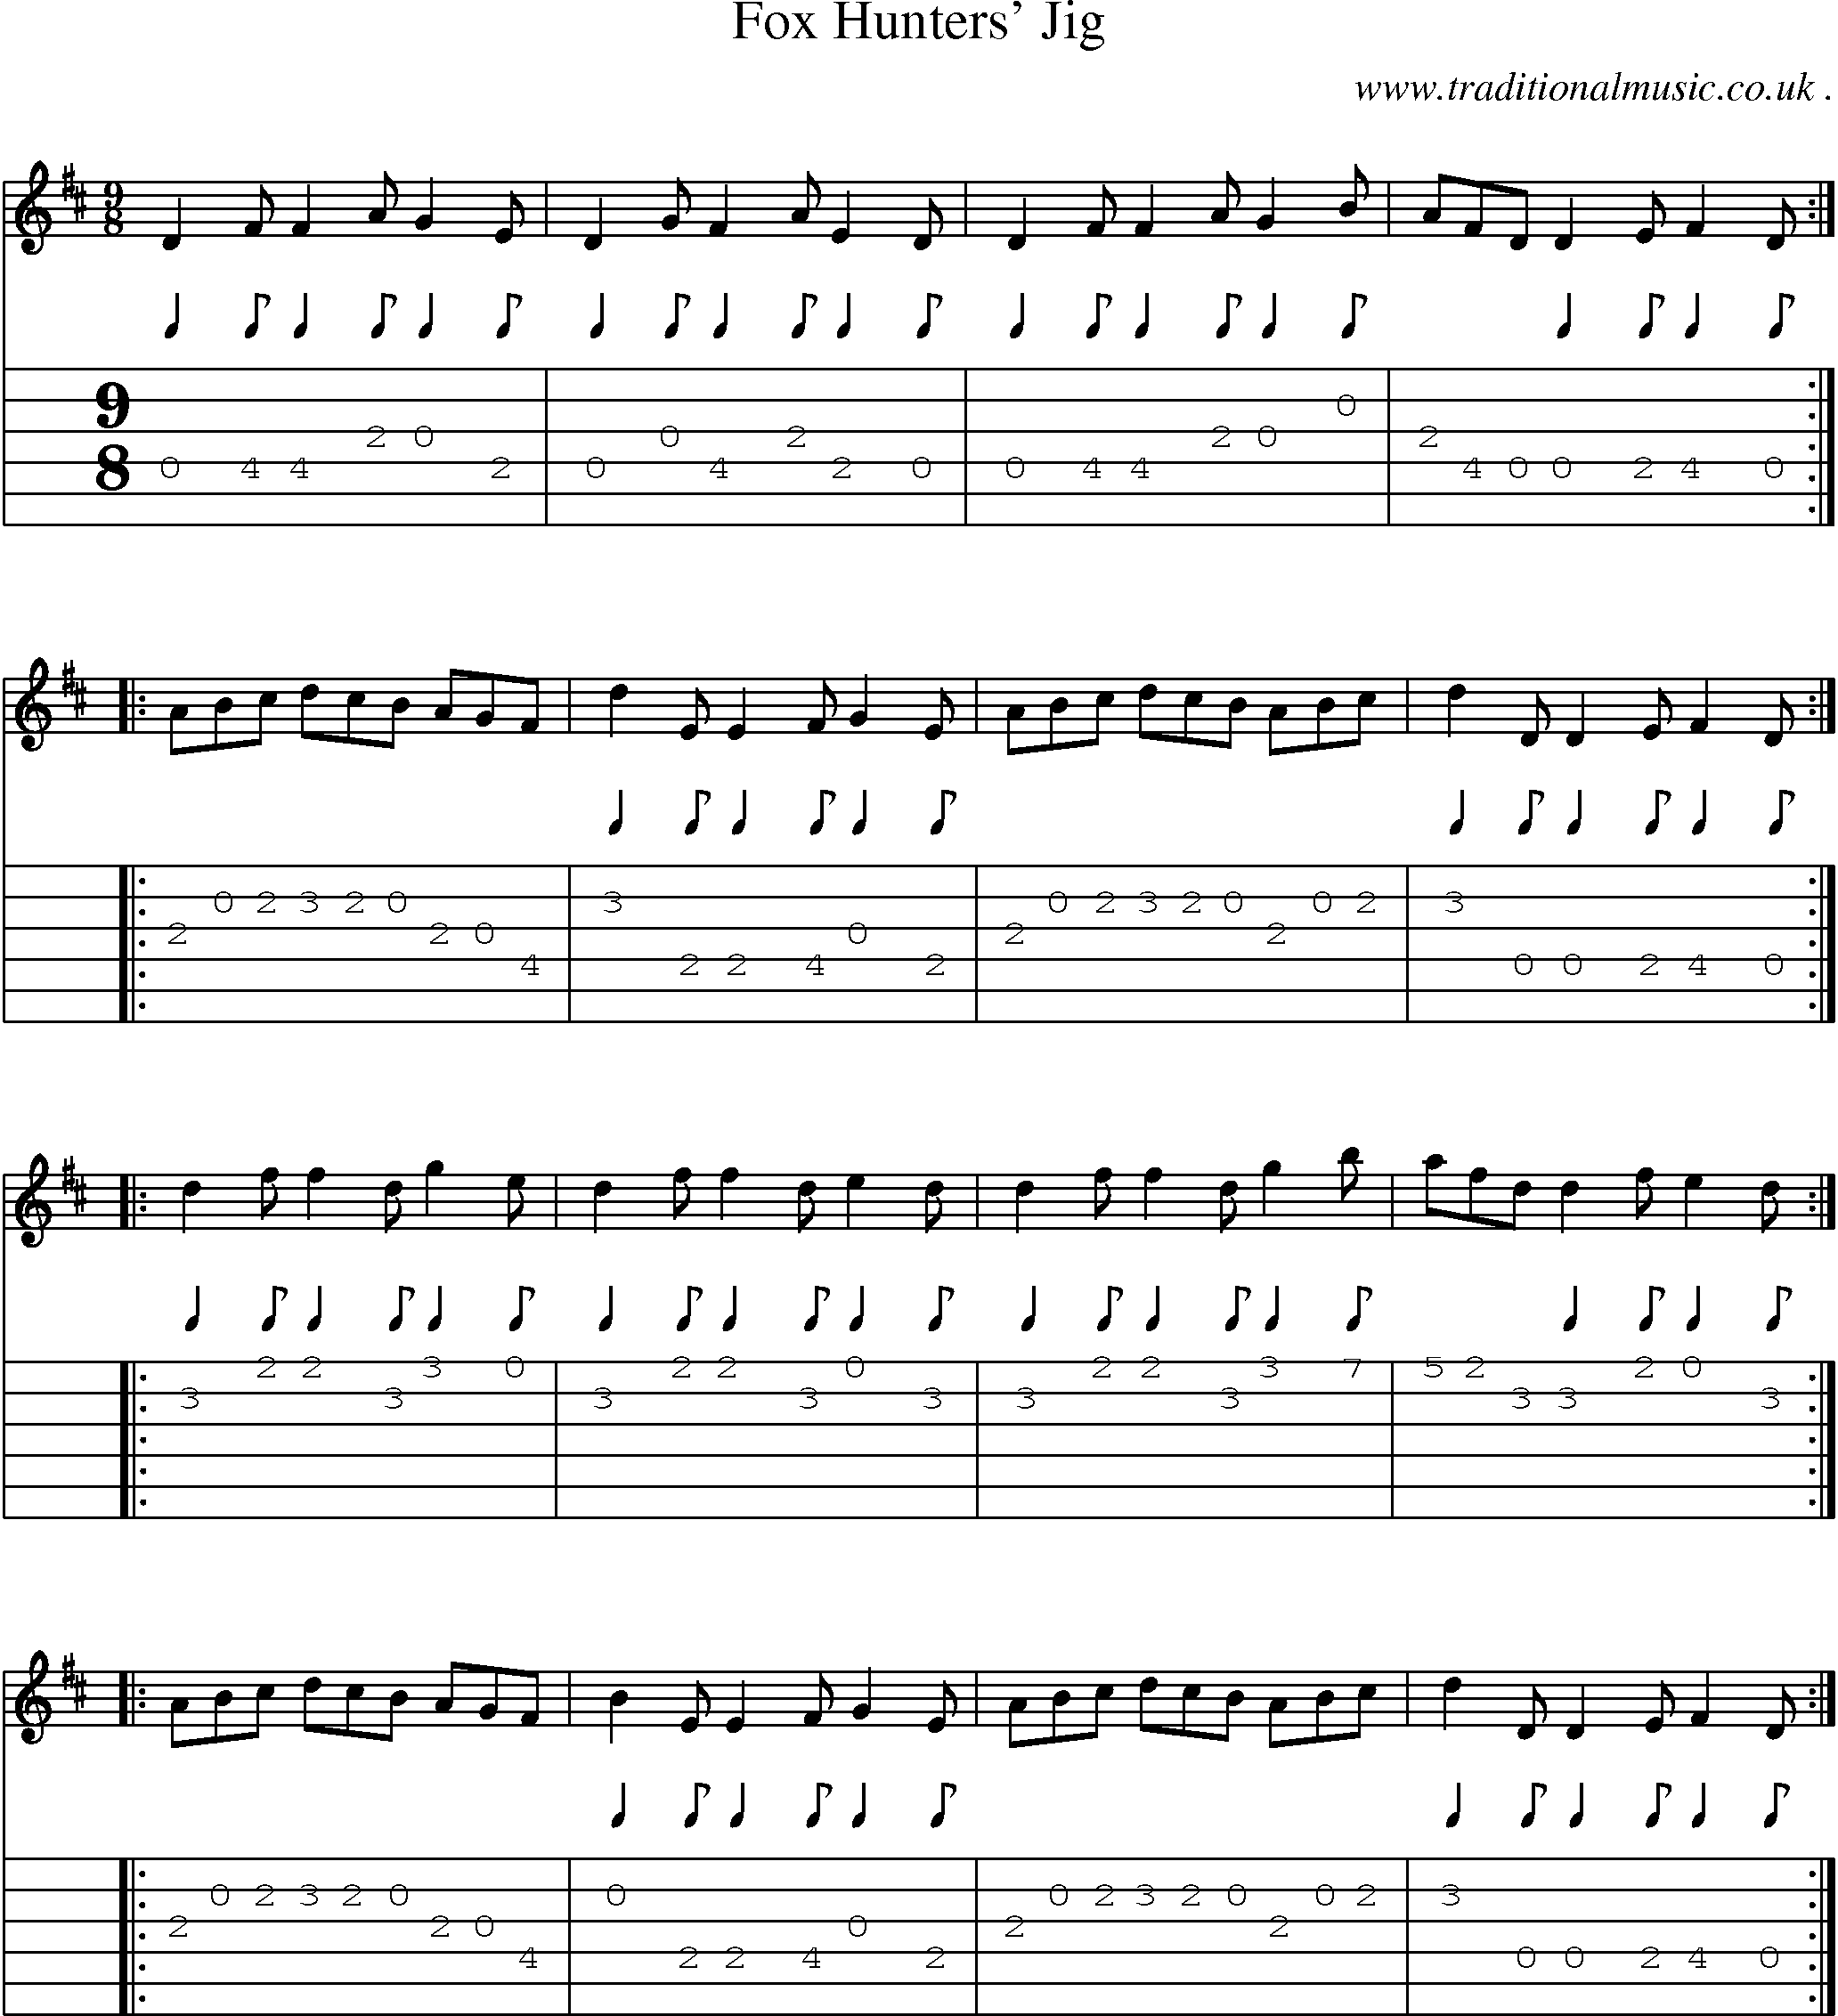 Sheet-Music and Guitar Tabs for Fox Hunters Jig